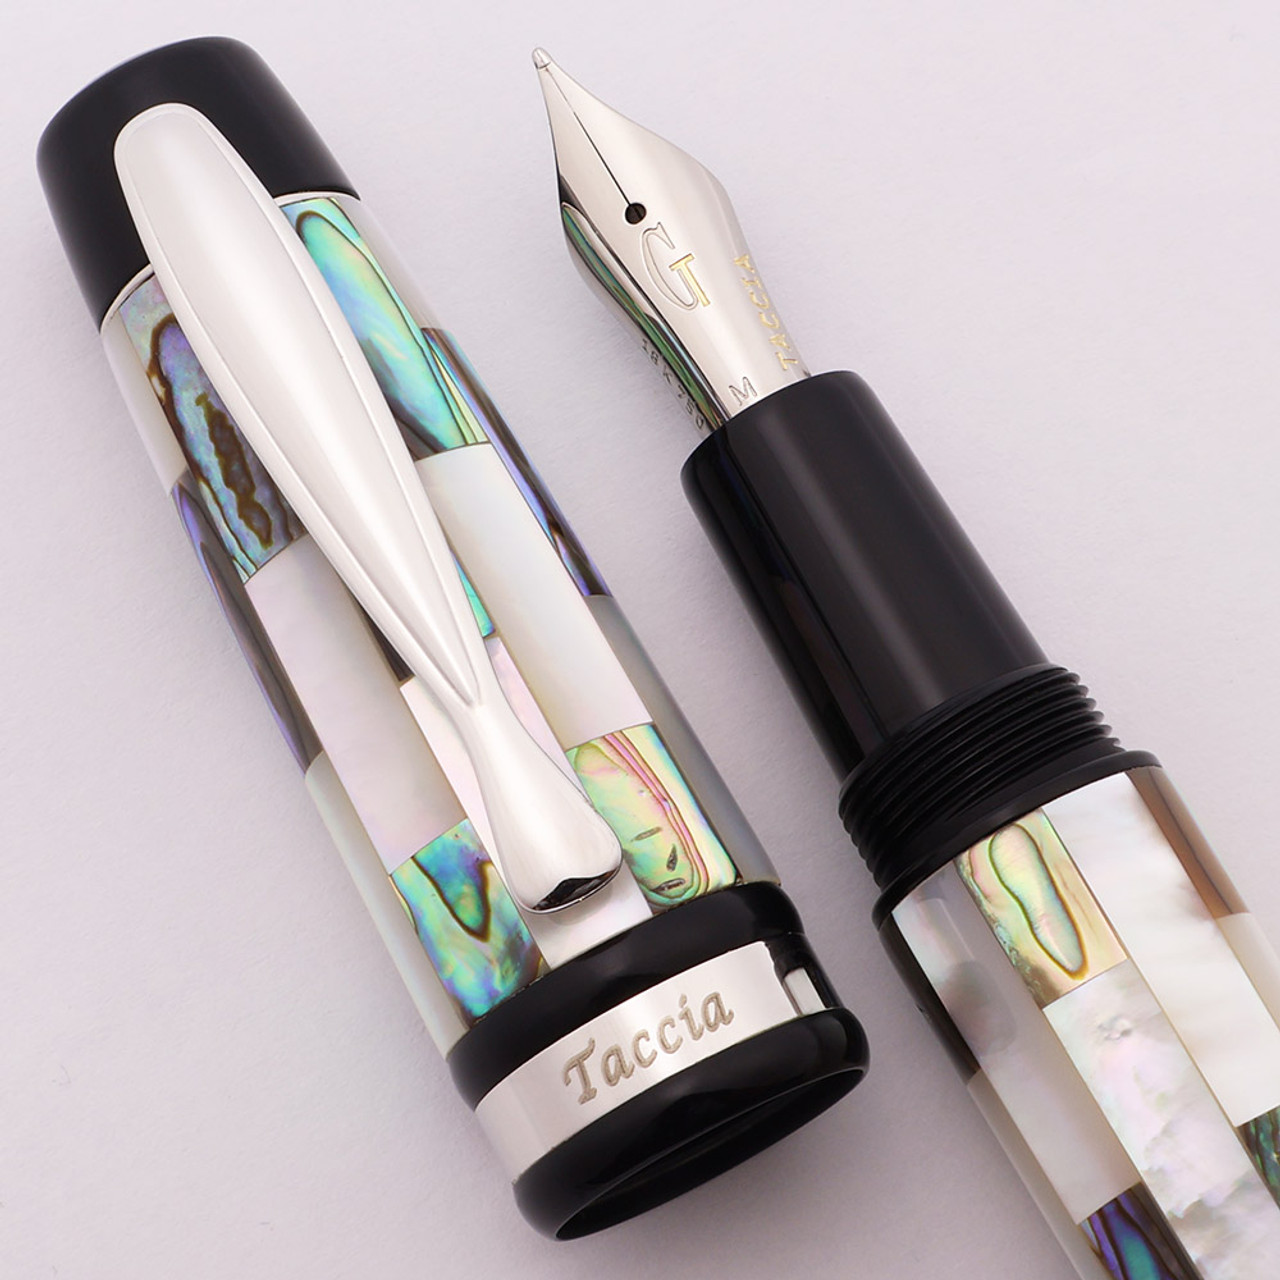 Taccia Harmony Fountain Pen -  Mother of Pearl, Chrome Trim, 18k Two-Toned Gold Nib (Excellent, Works Well)